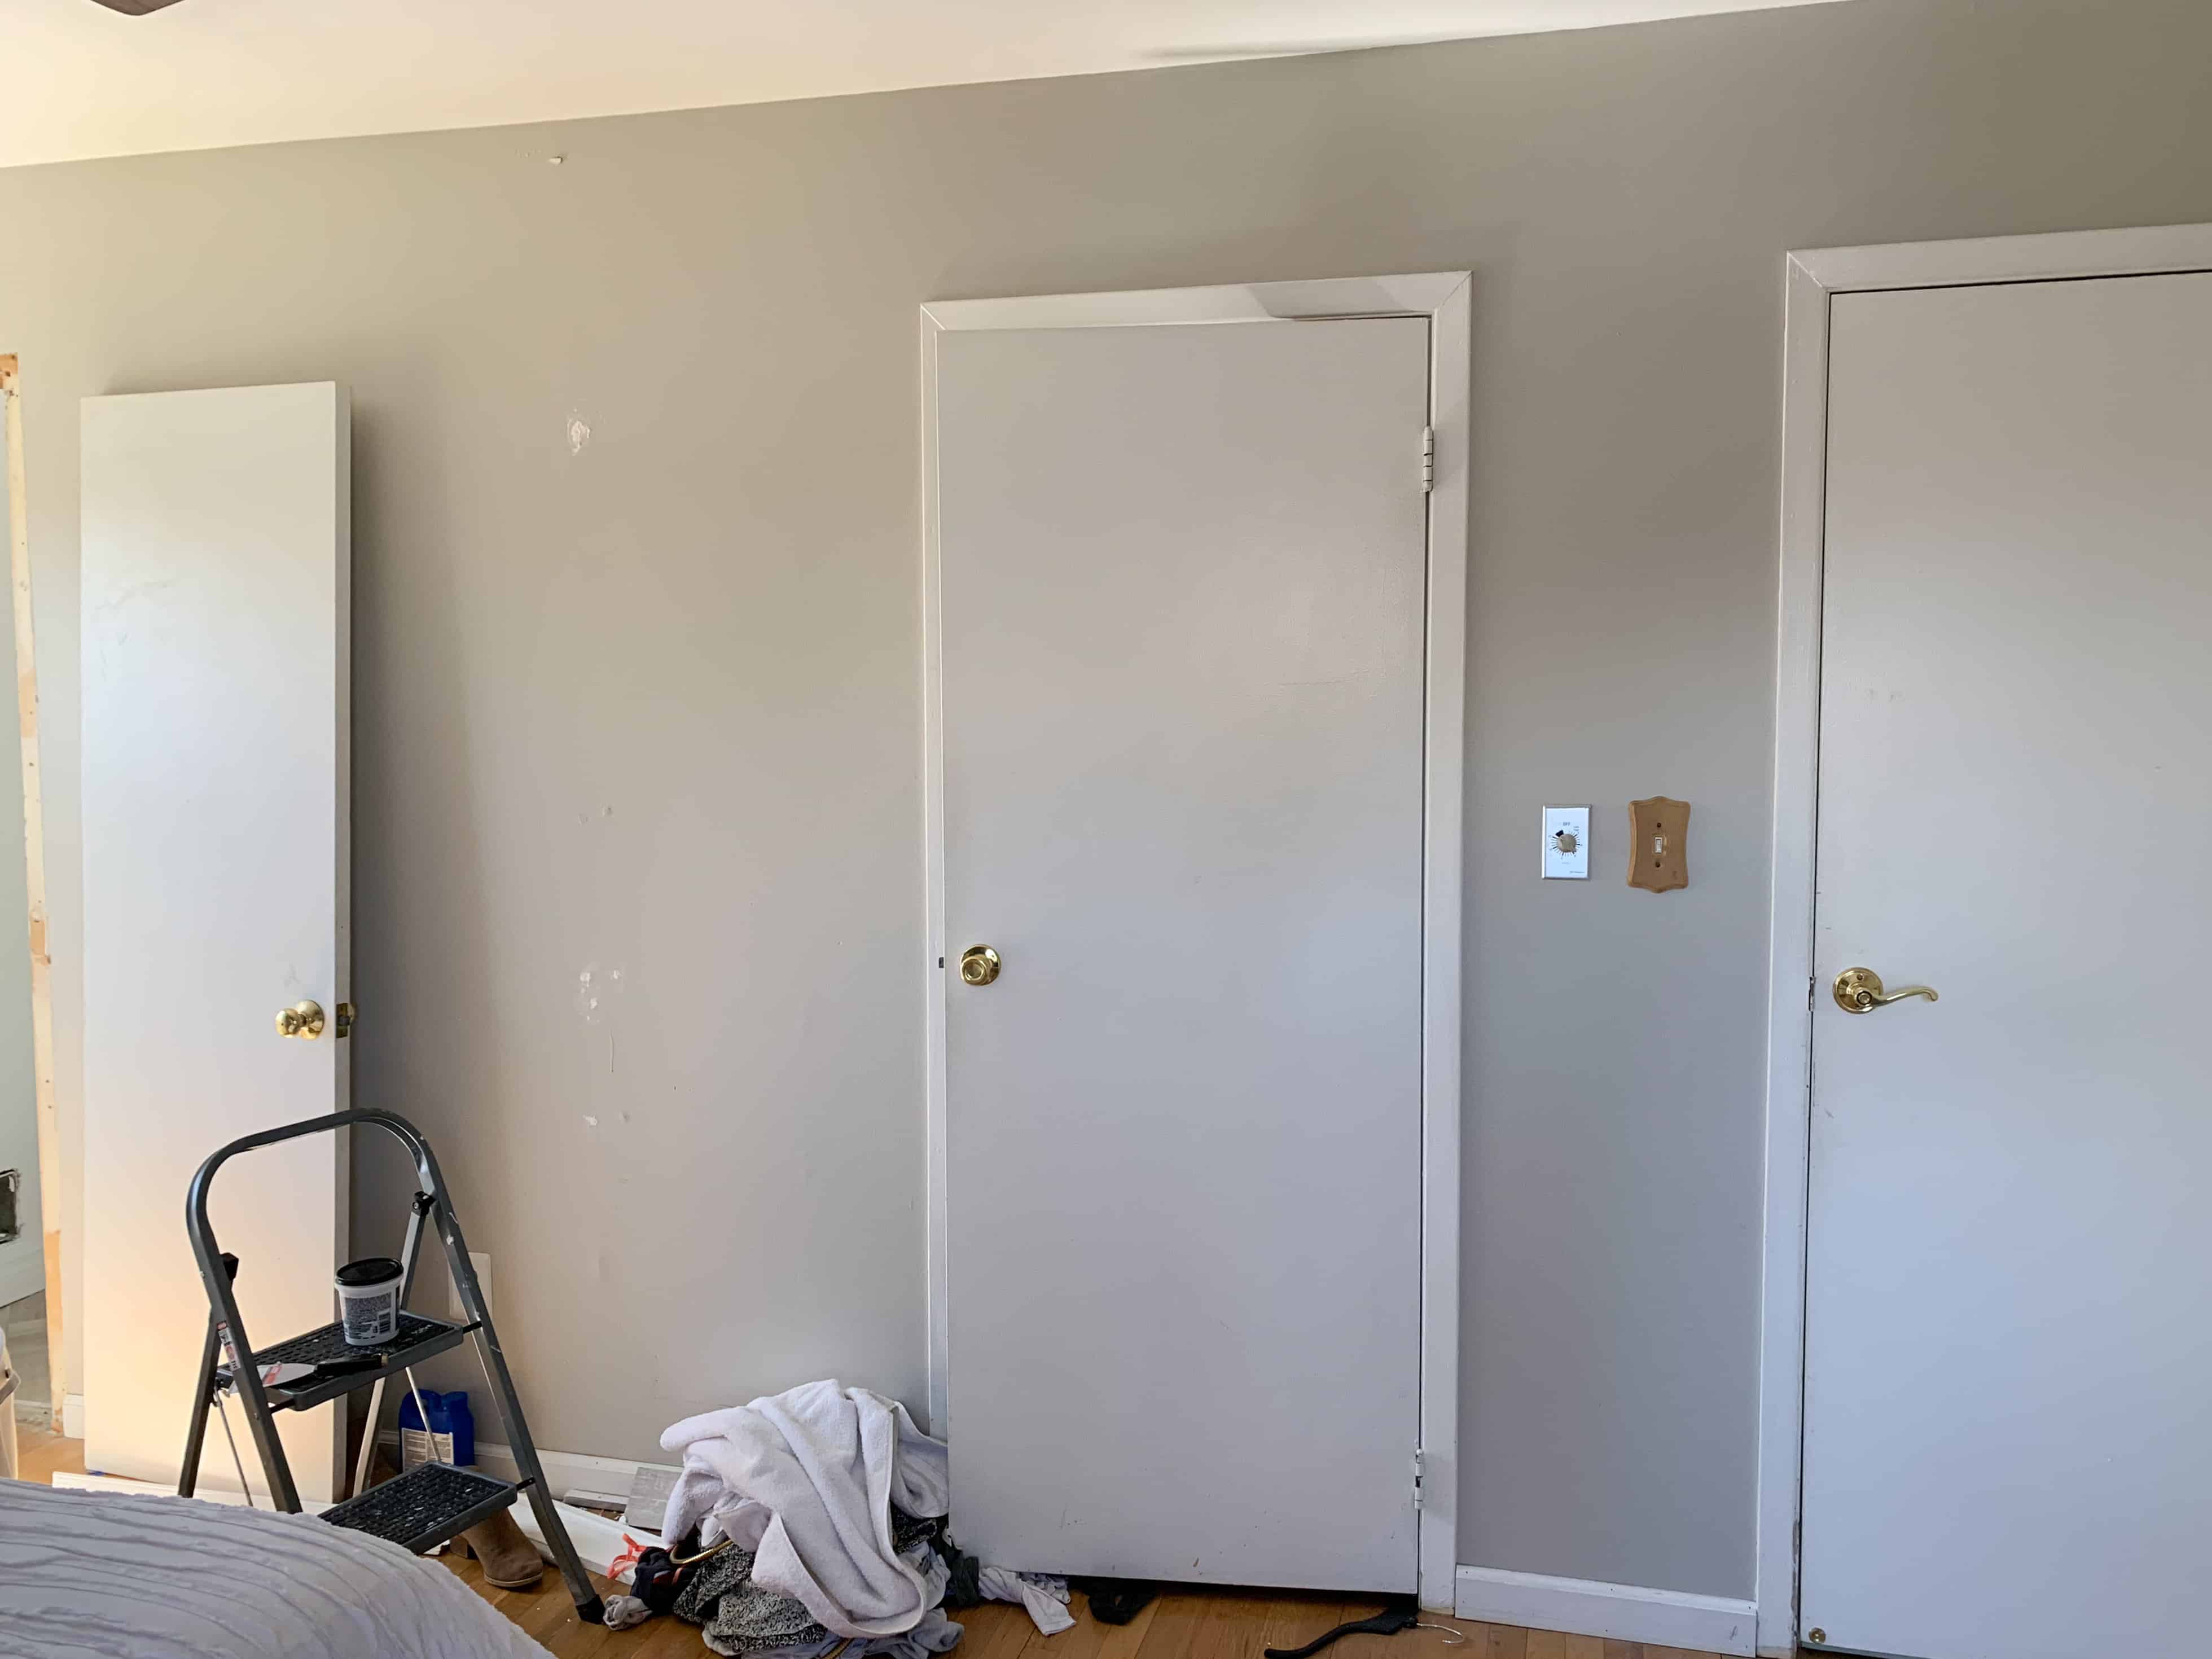 This Paint Trick Will Make Your Room Look Bigger Than It Actually Is,Nancy Fuller Farmhouse Rules Cancelled